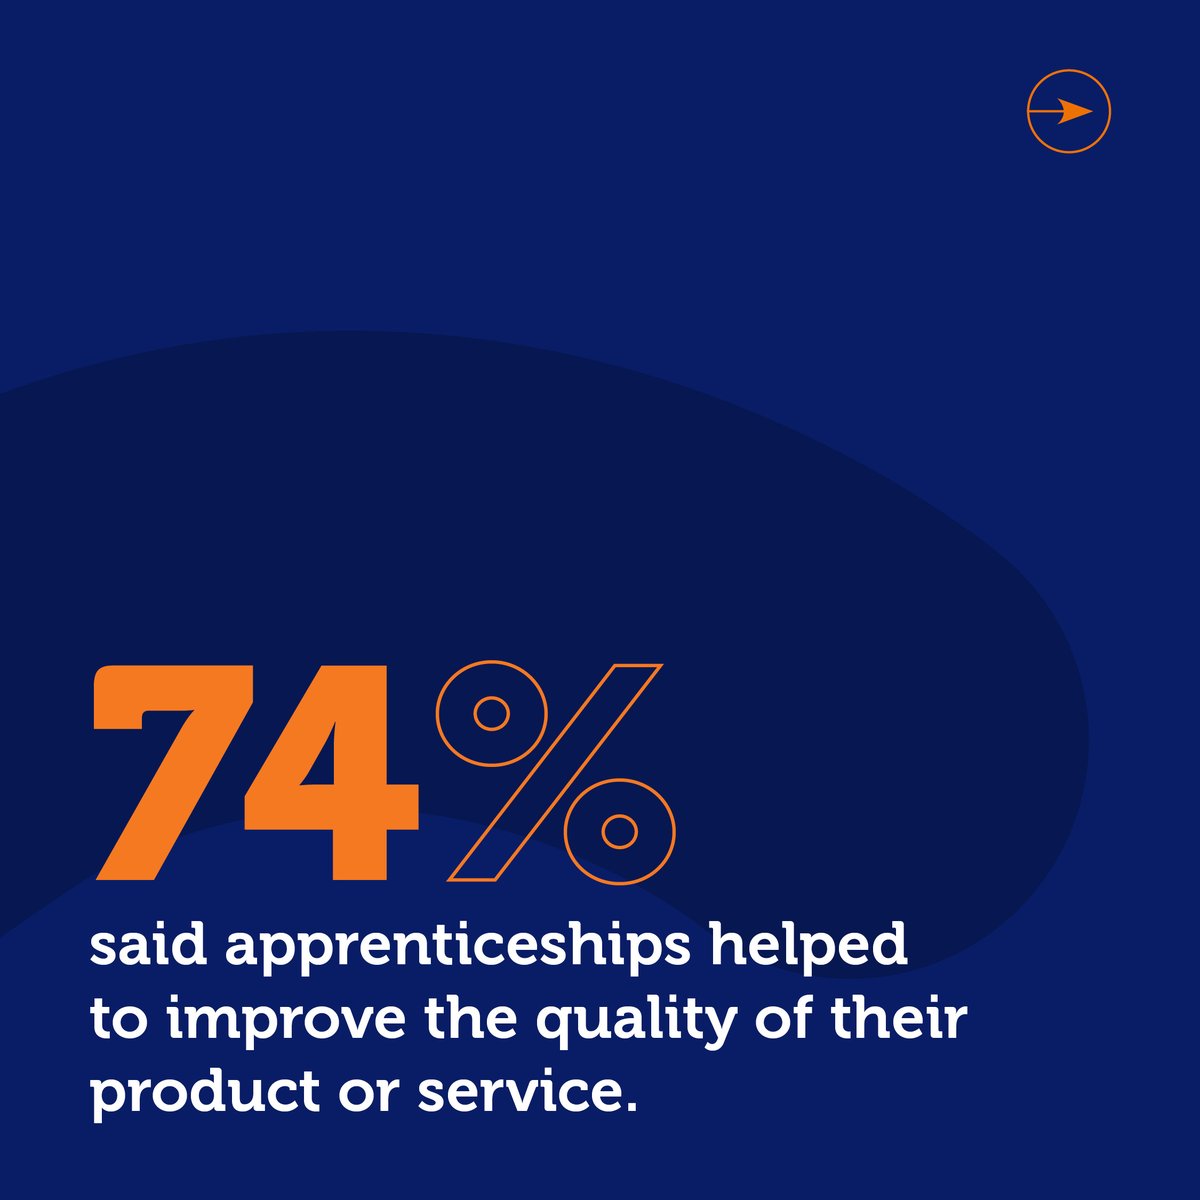 Is your organisationtaking advantage of the benefits that apprenticeships offer? CIRO provides a leading apprenticeship programme to upskill employees and support career development. Contact our apprenticeships team at apprentice@railwayoperators.co.uk. #NAW2024 #skillsforlife